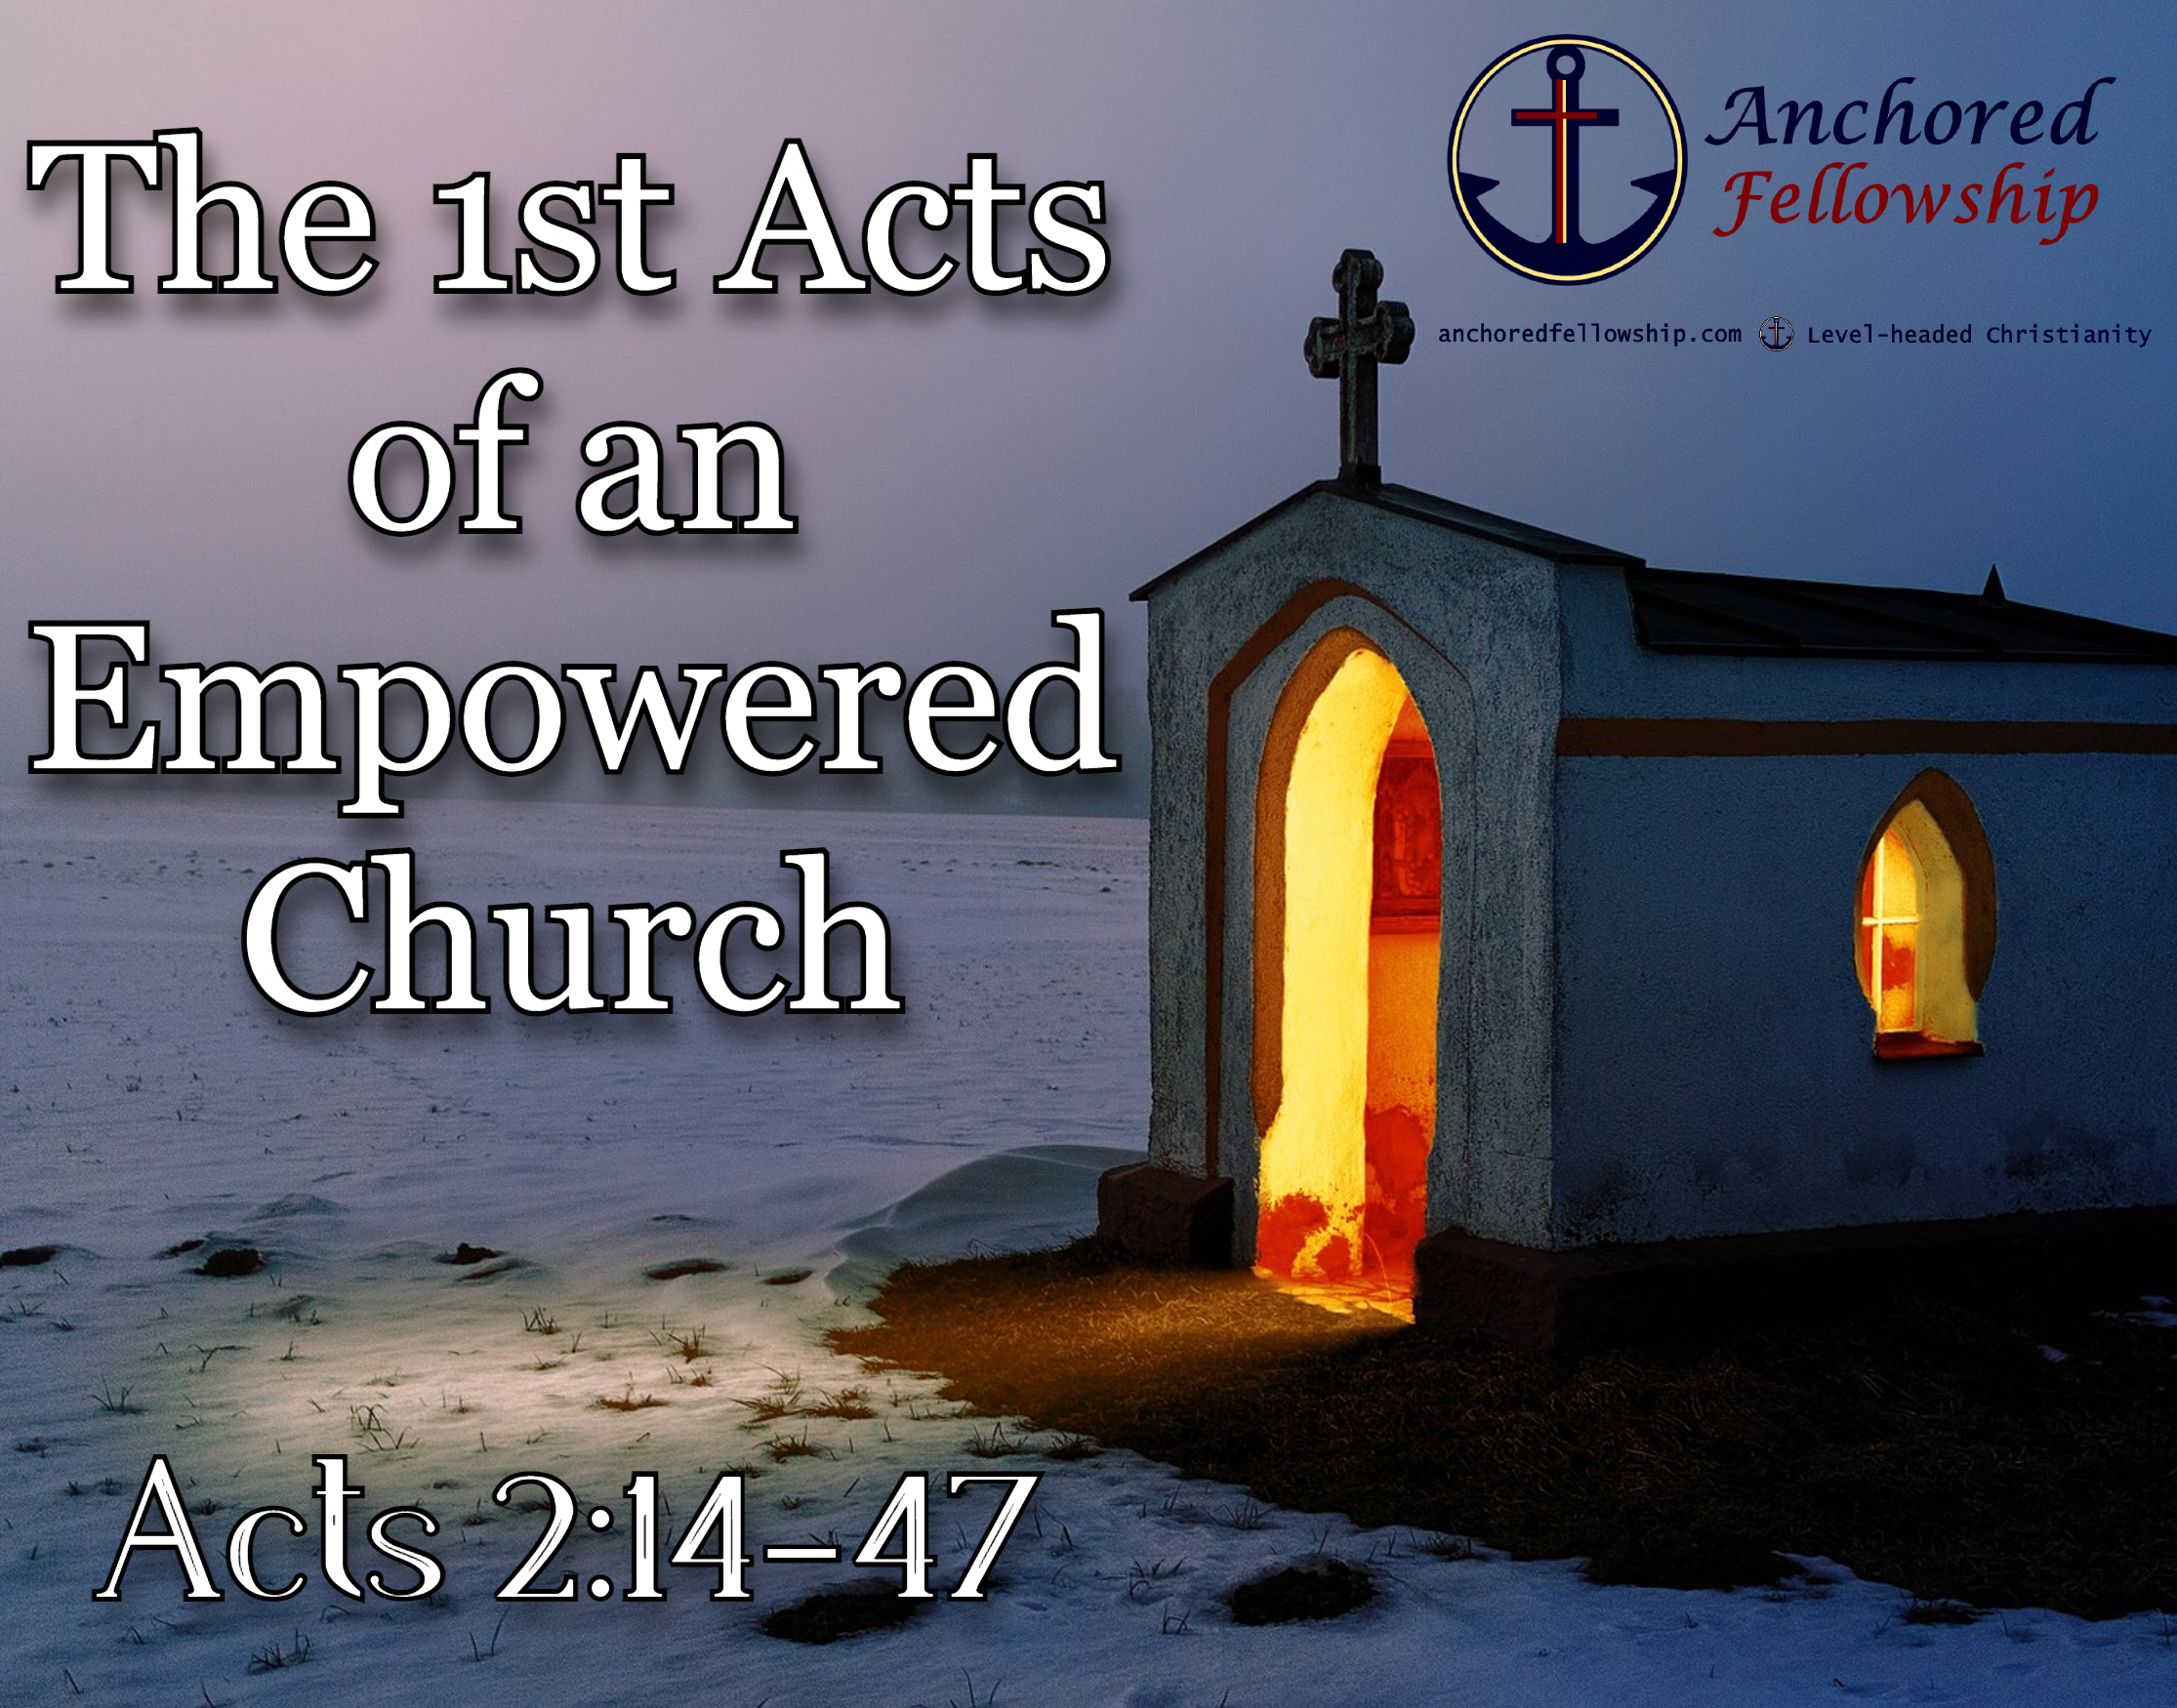 The 1st Acts of an Empowered Church Image